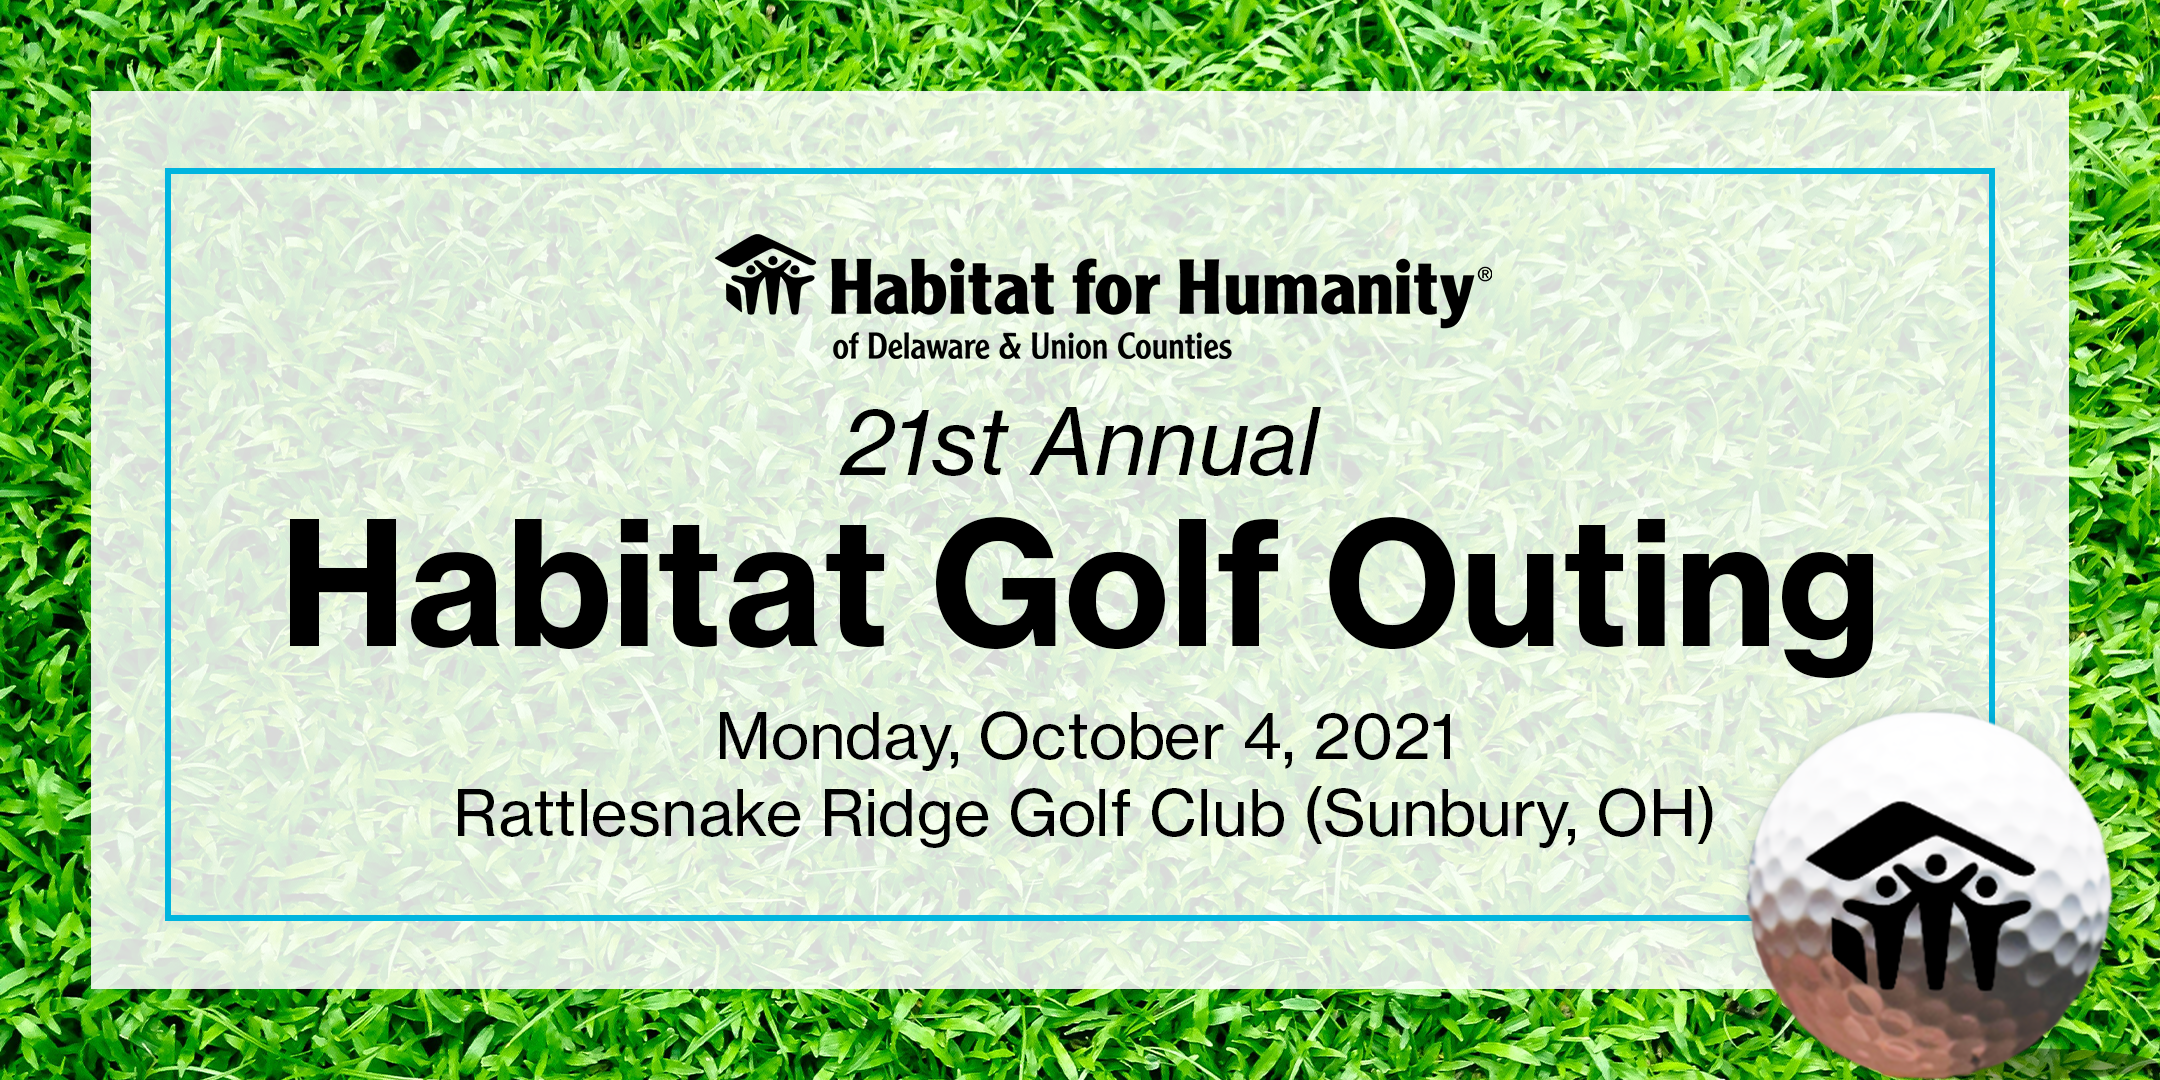 Habitat for Humanity Golf Outing